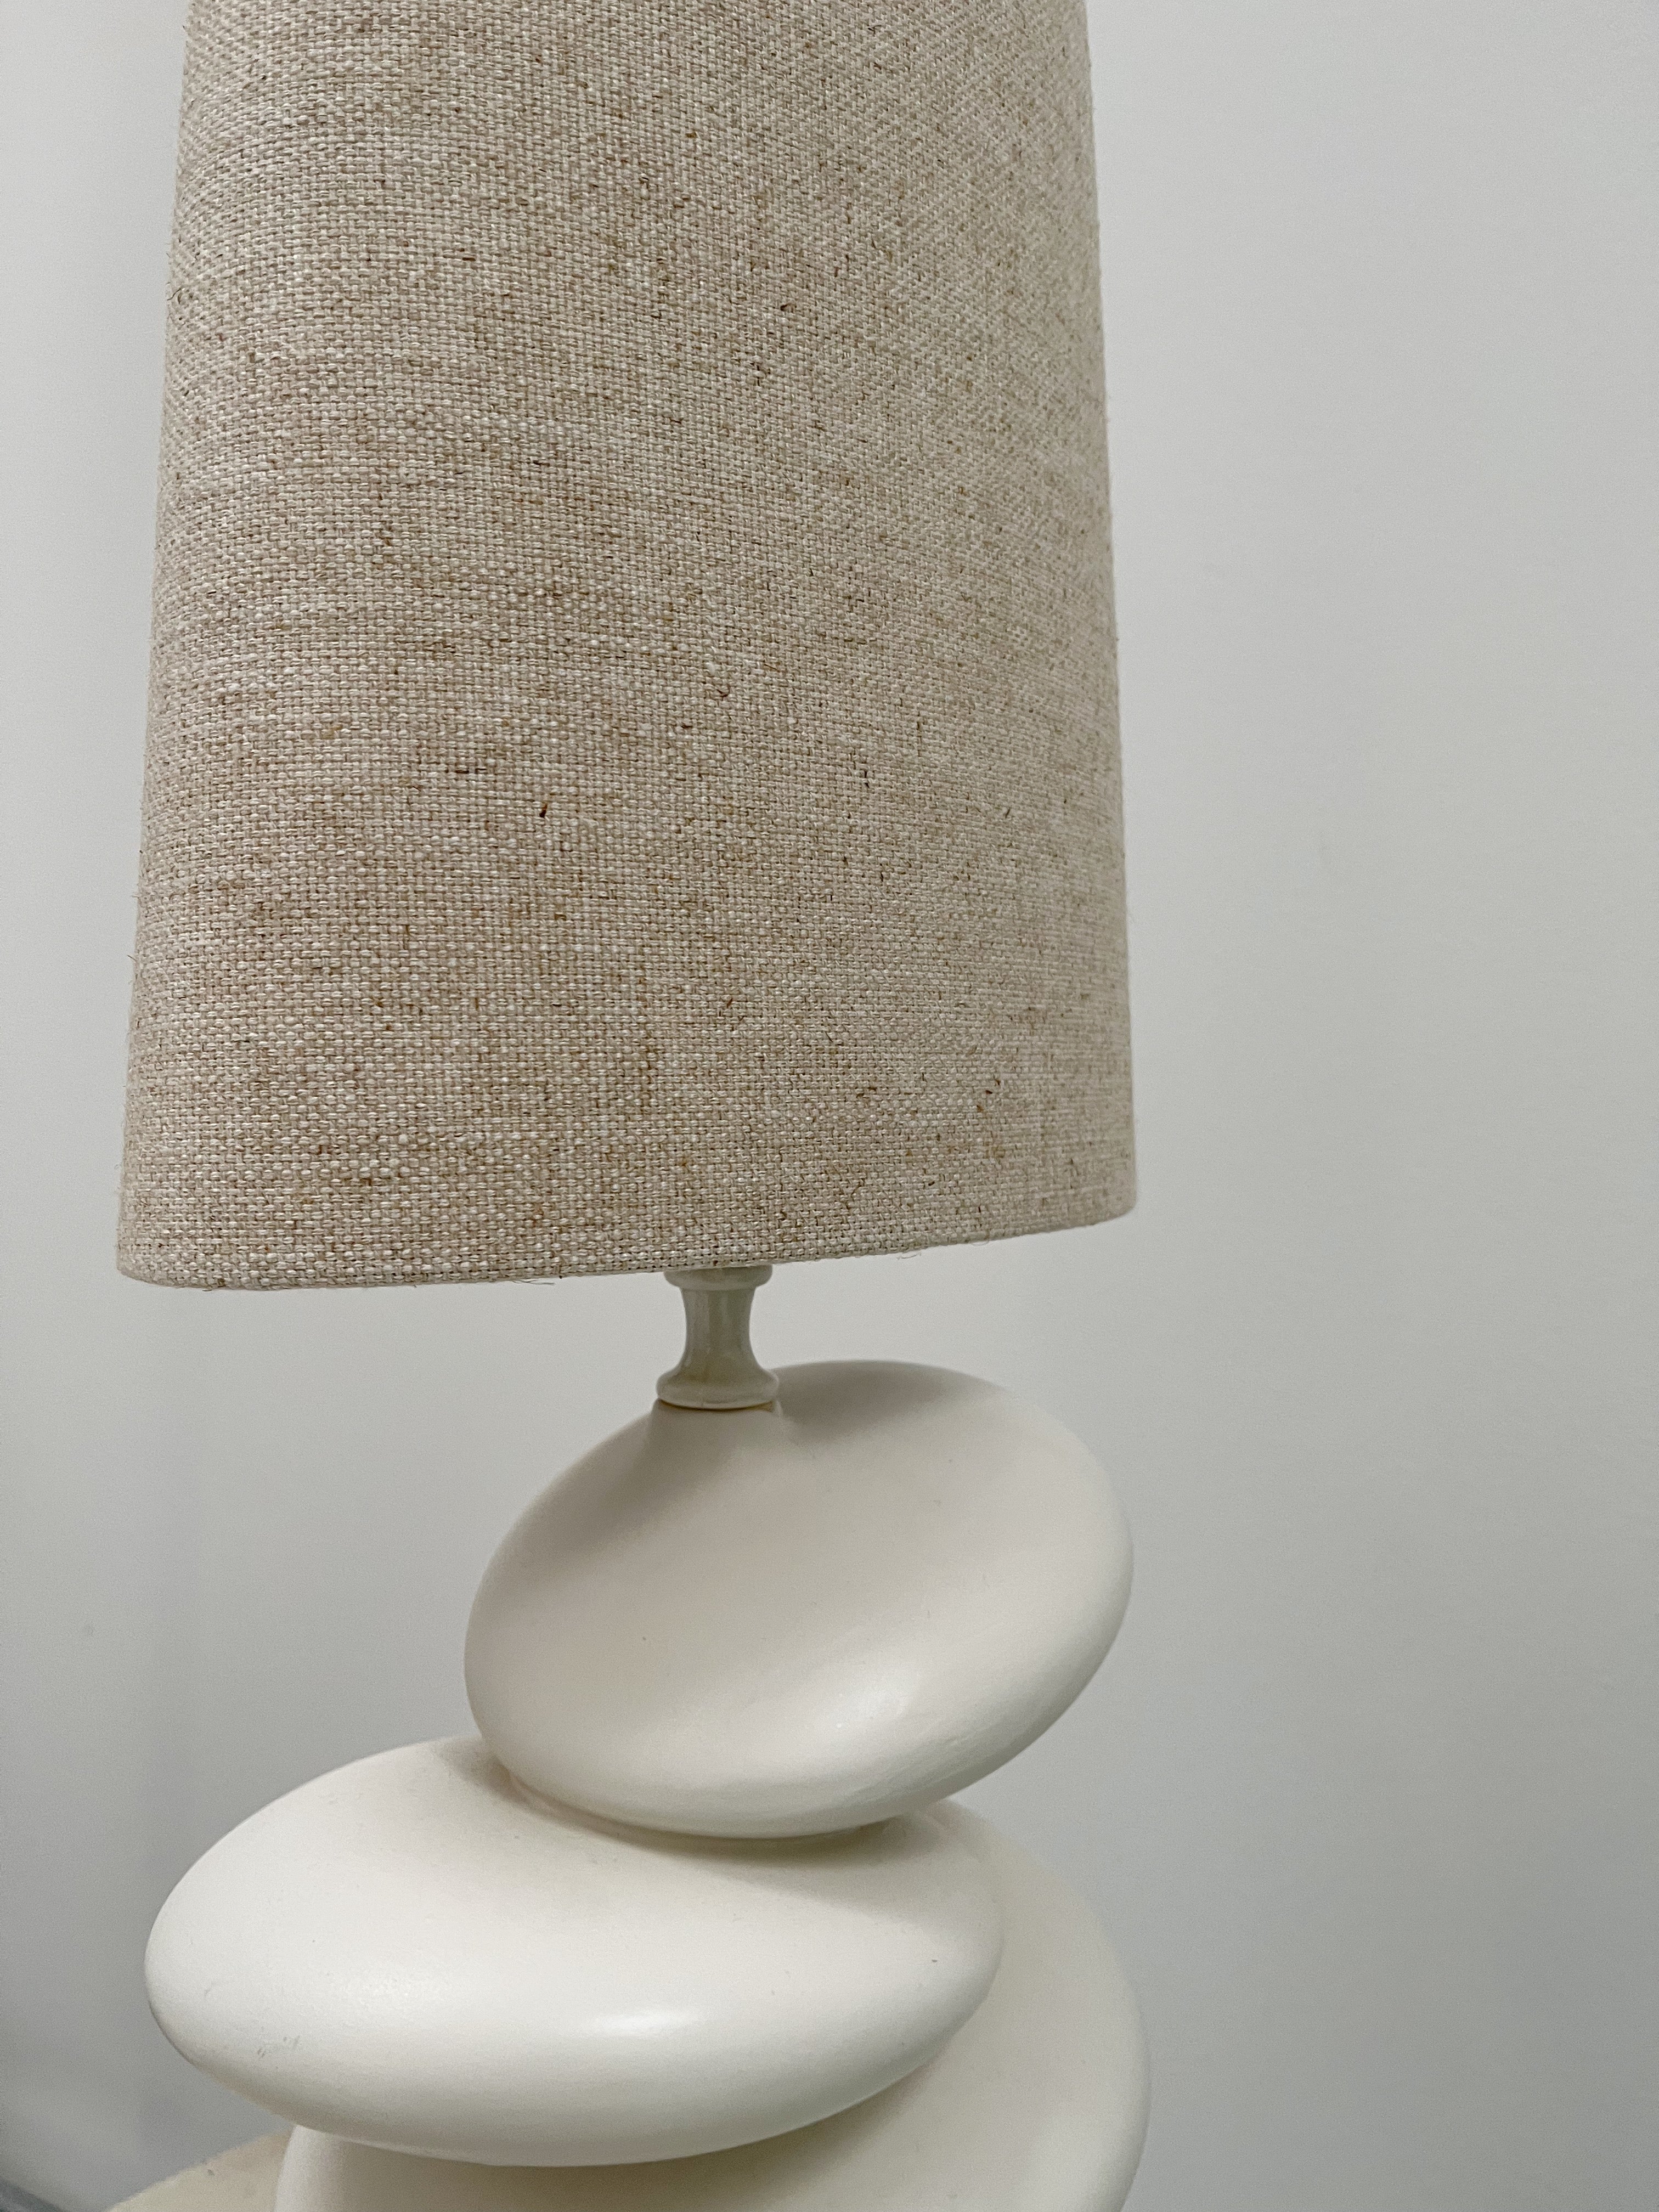 STACKED TABLELAMP